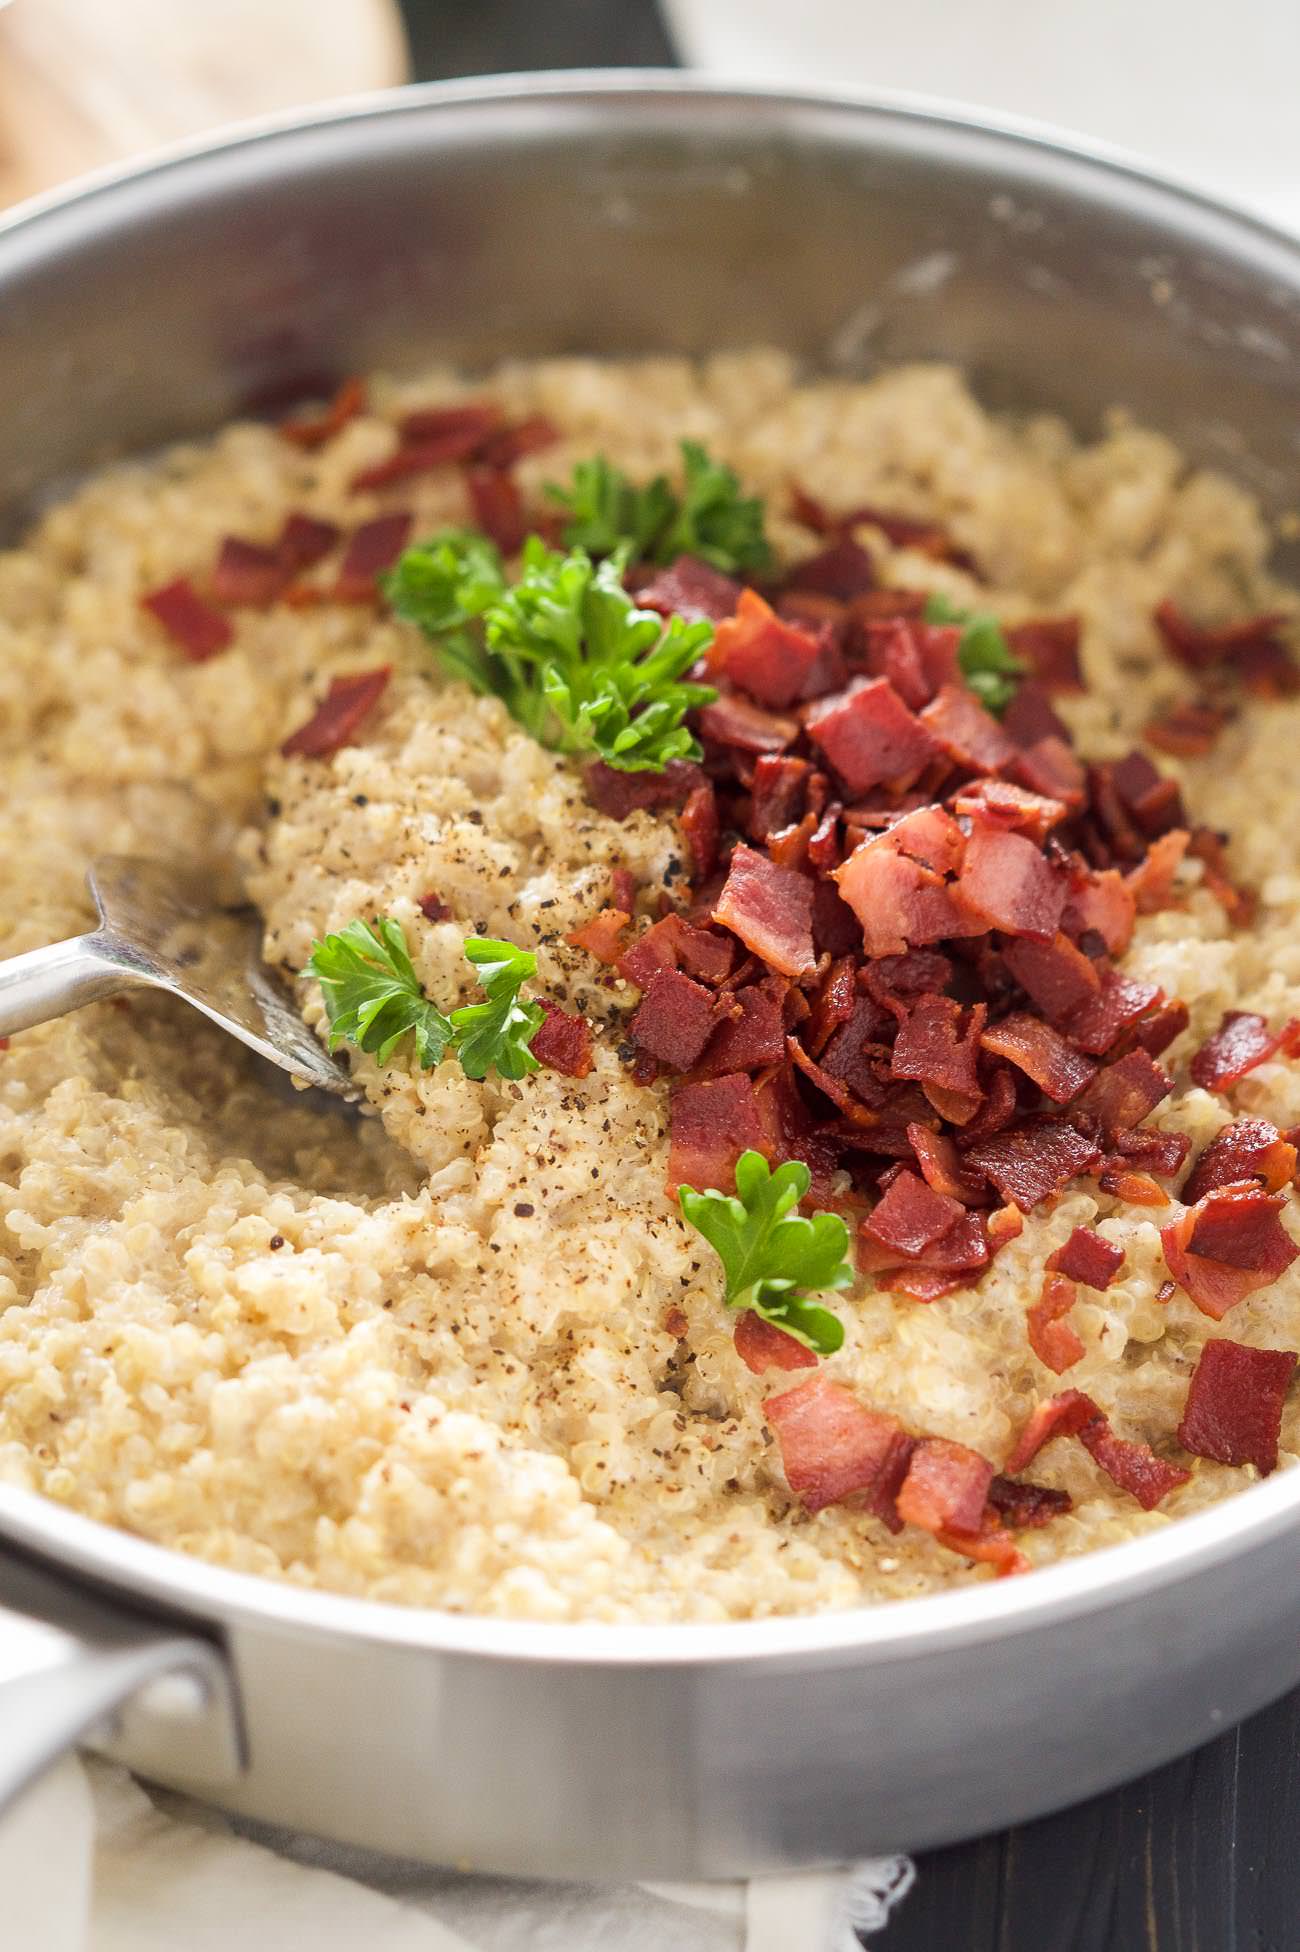 Goat Cheese & Bacon Quinoa Risotto is a shortcut version of the classic risotto! Creamy goat cheese, bacon and quinoa come together in under 30 minutes and requires minimal hands on time; making this the perfect healthy, side dish!